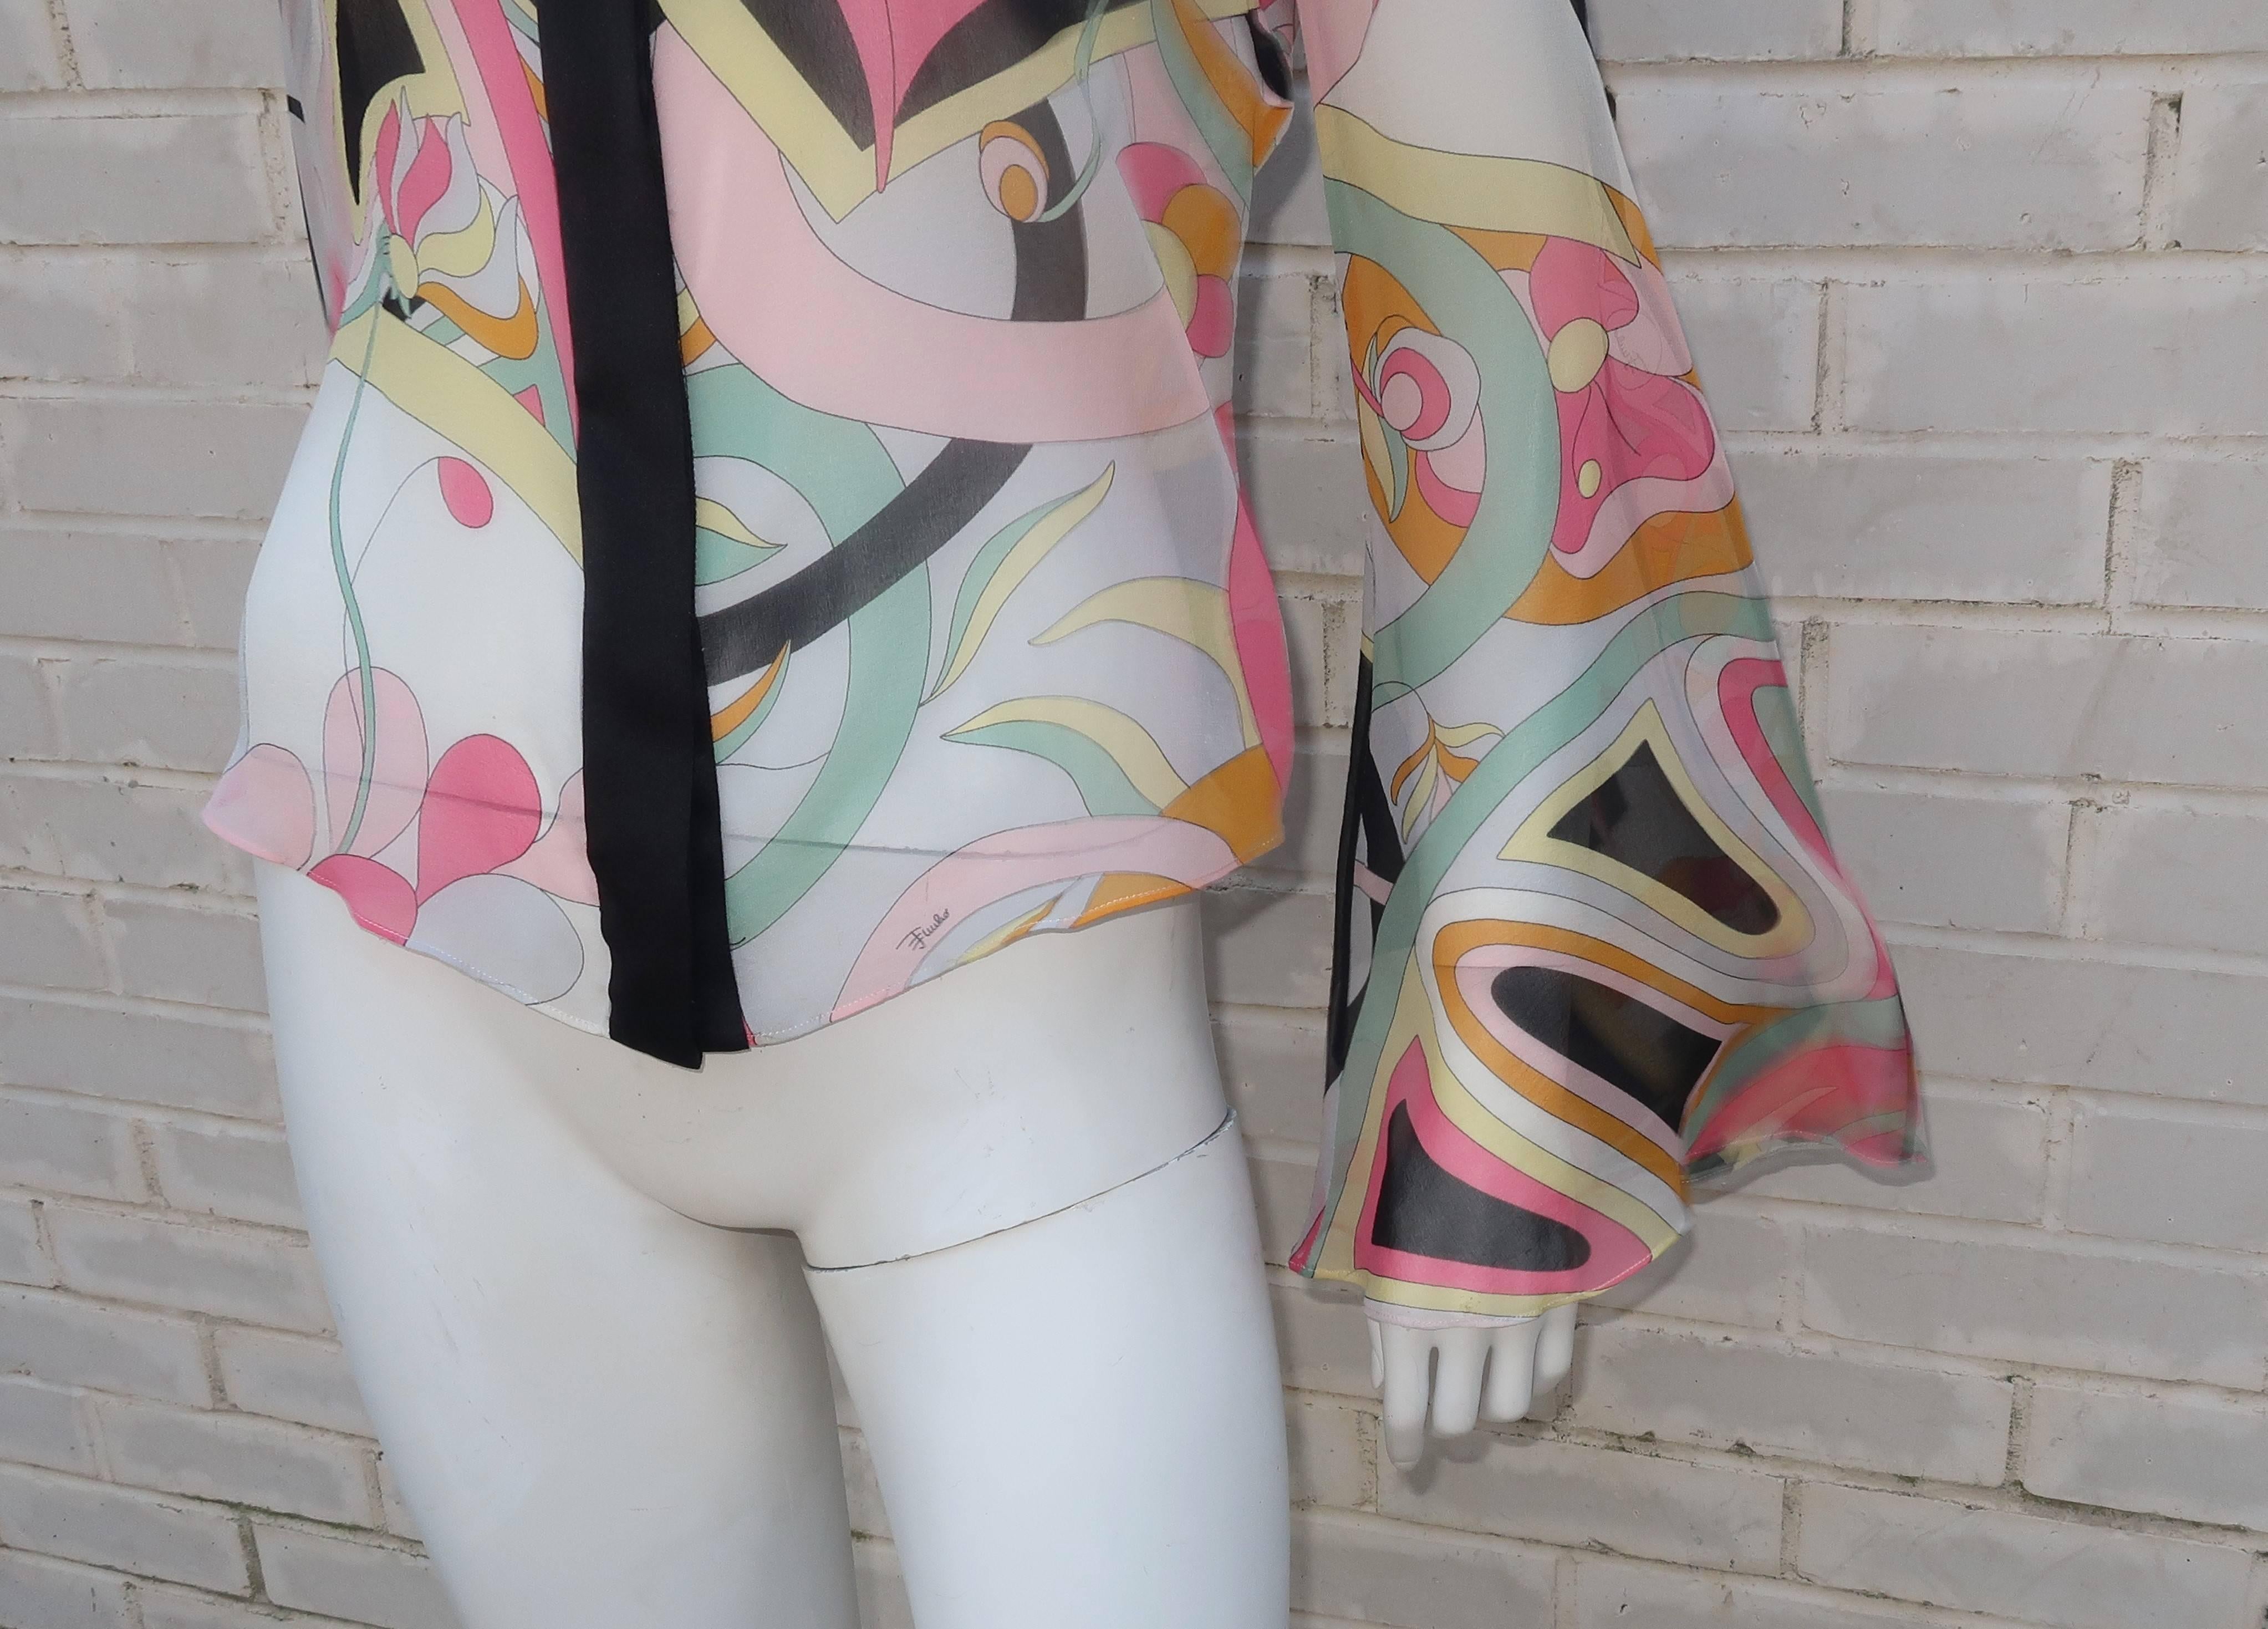 Emilio Pucci, the king of psychedelic prints, produced this silk chiffon blouse C.2000 with a definitive nod to the mod rock & roll era fashions of the 1960's and 1970's.  The blouse has hidden buttons at the front with black charmeuse collar and